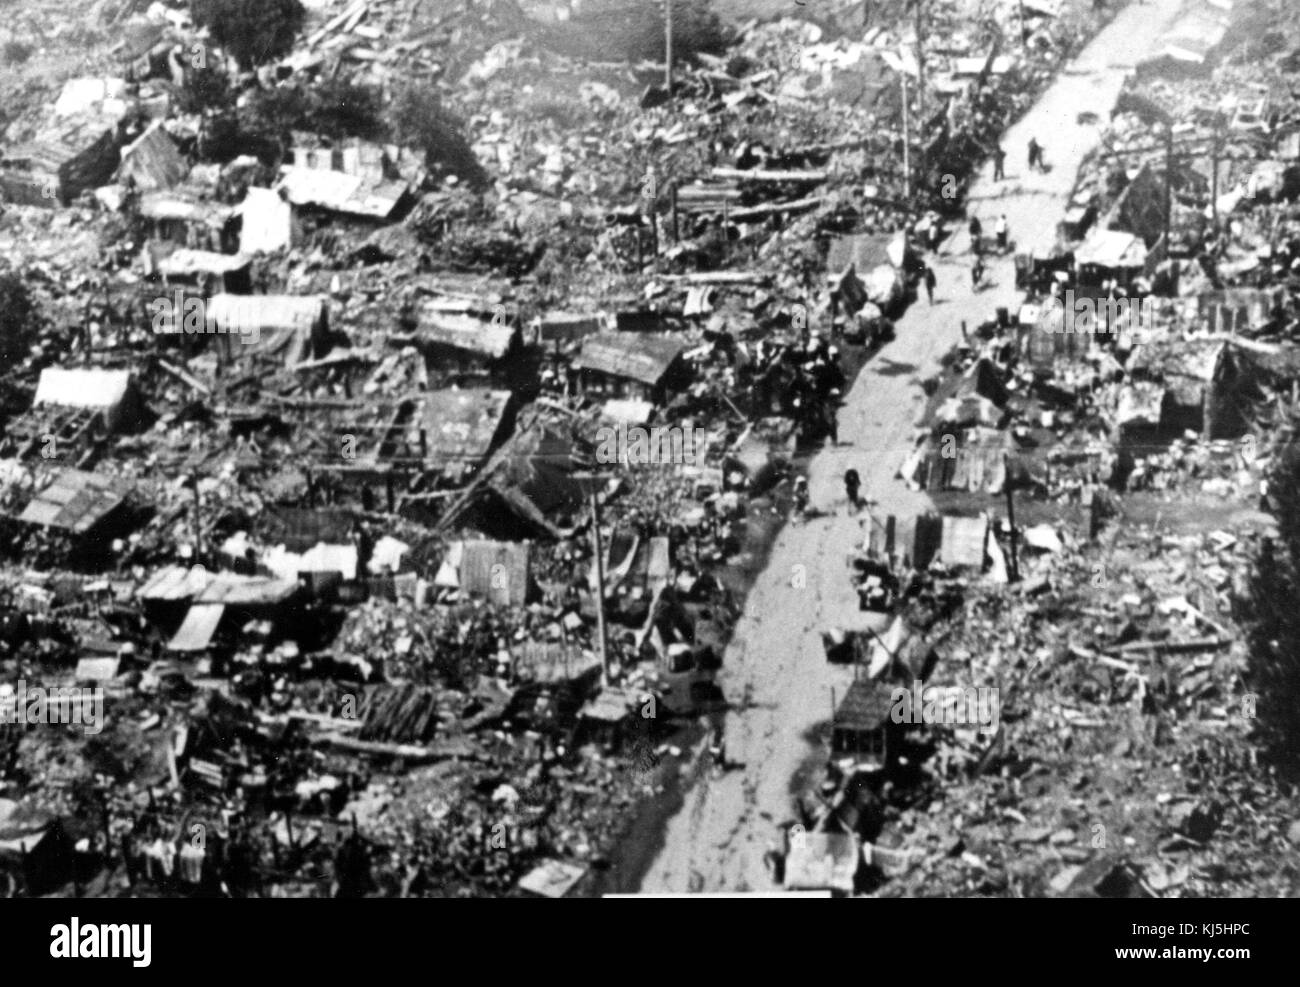 Tangshan, China, Earthquake July 28, 1976 Devastation in Tangshan after the earthquake Stock Photo